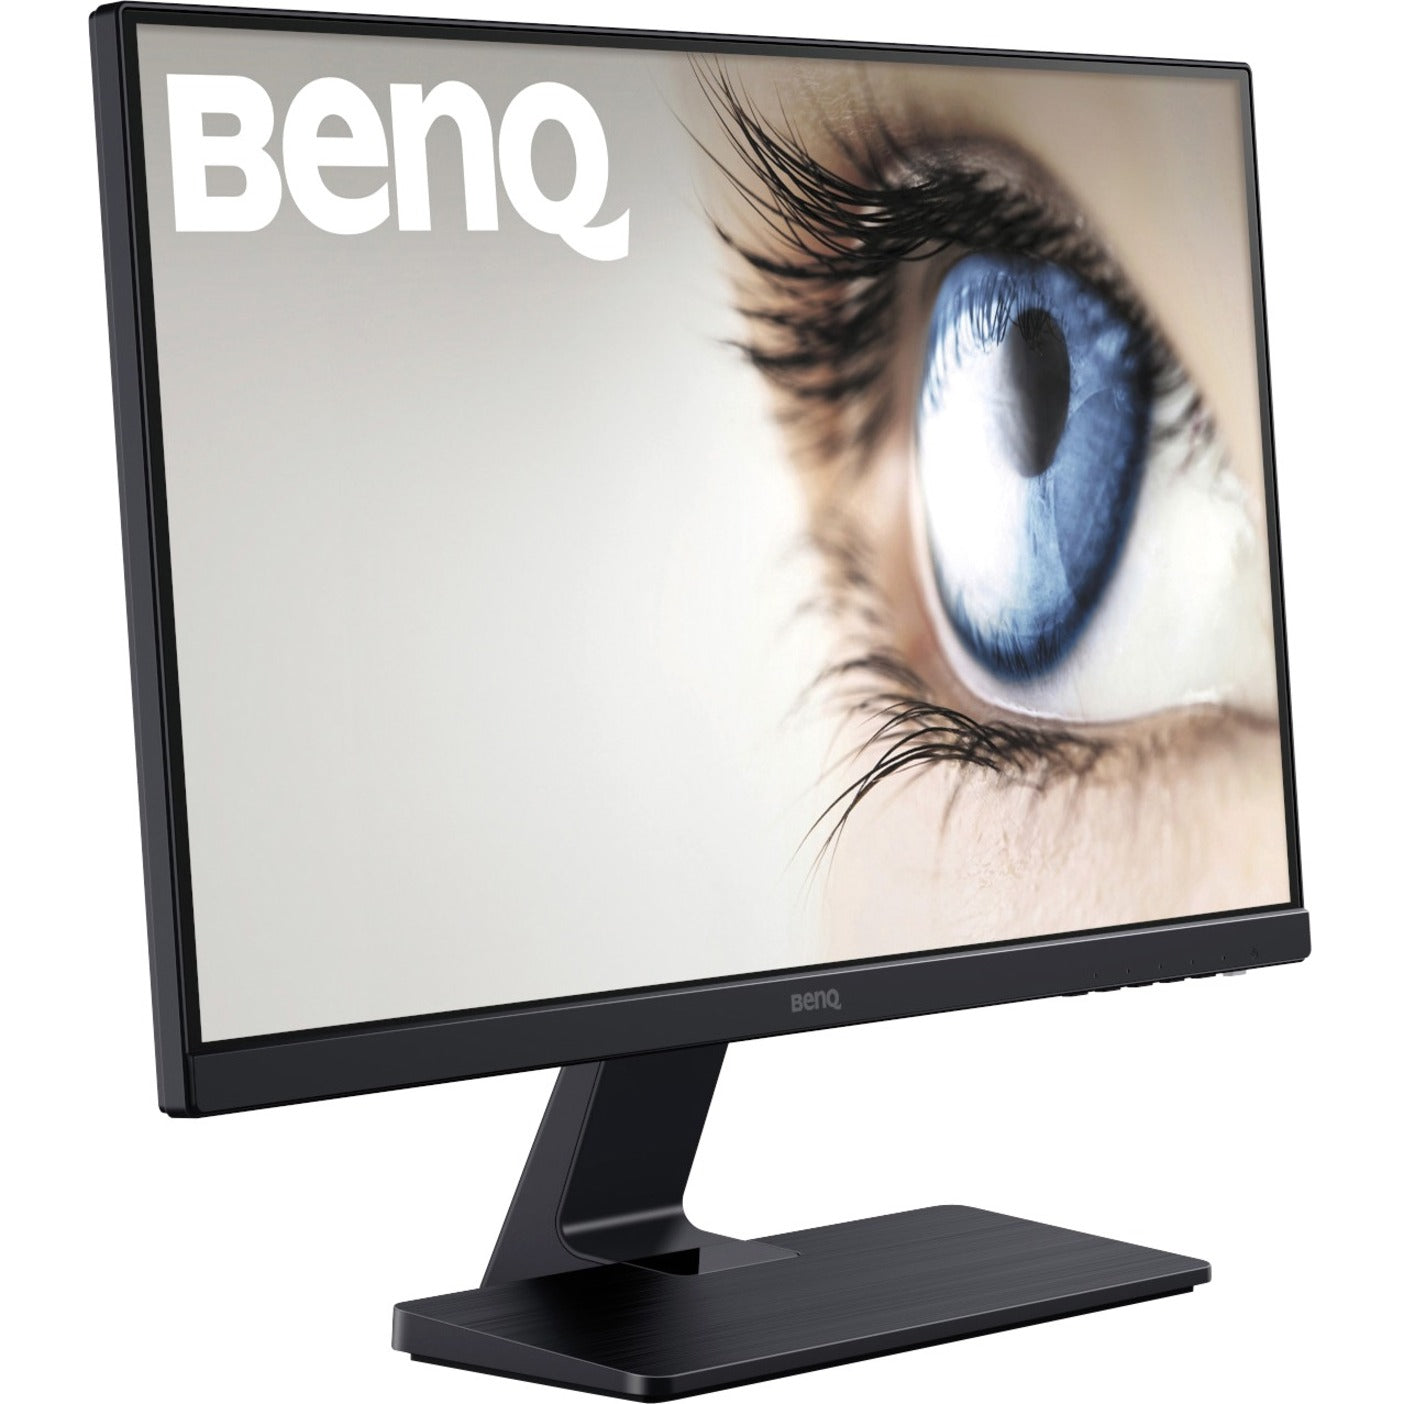 BenQ GW2475H 23.8" Full HD LCD Monitor - Stylish Monitor with Eye-care Technology, FHD, HDMI [Discontinued]